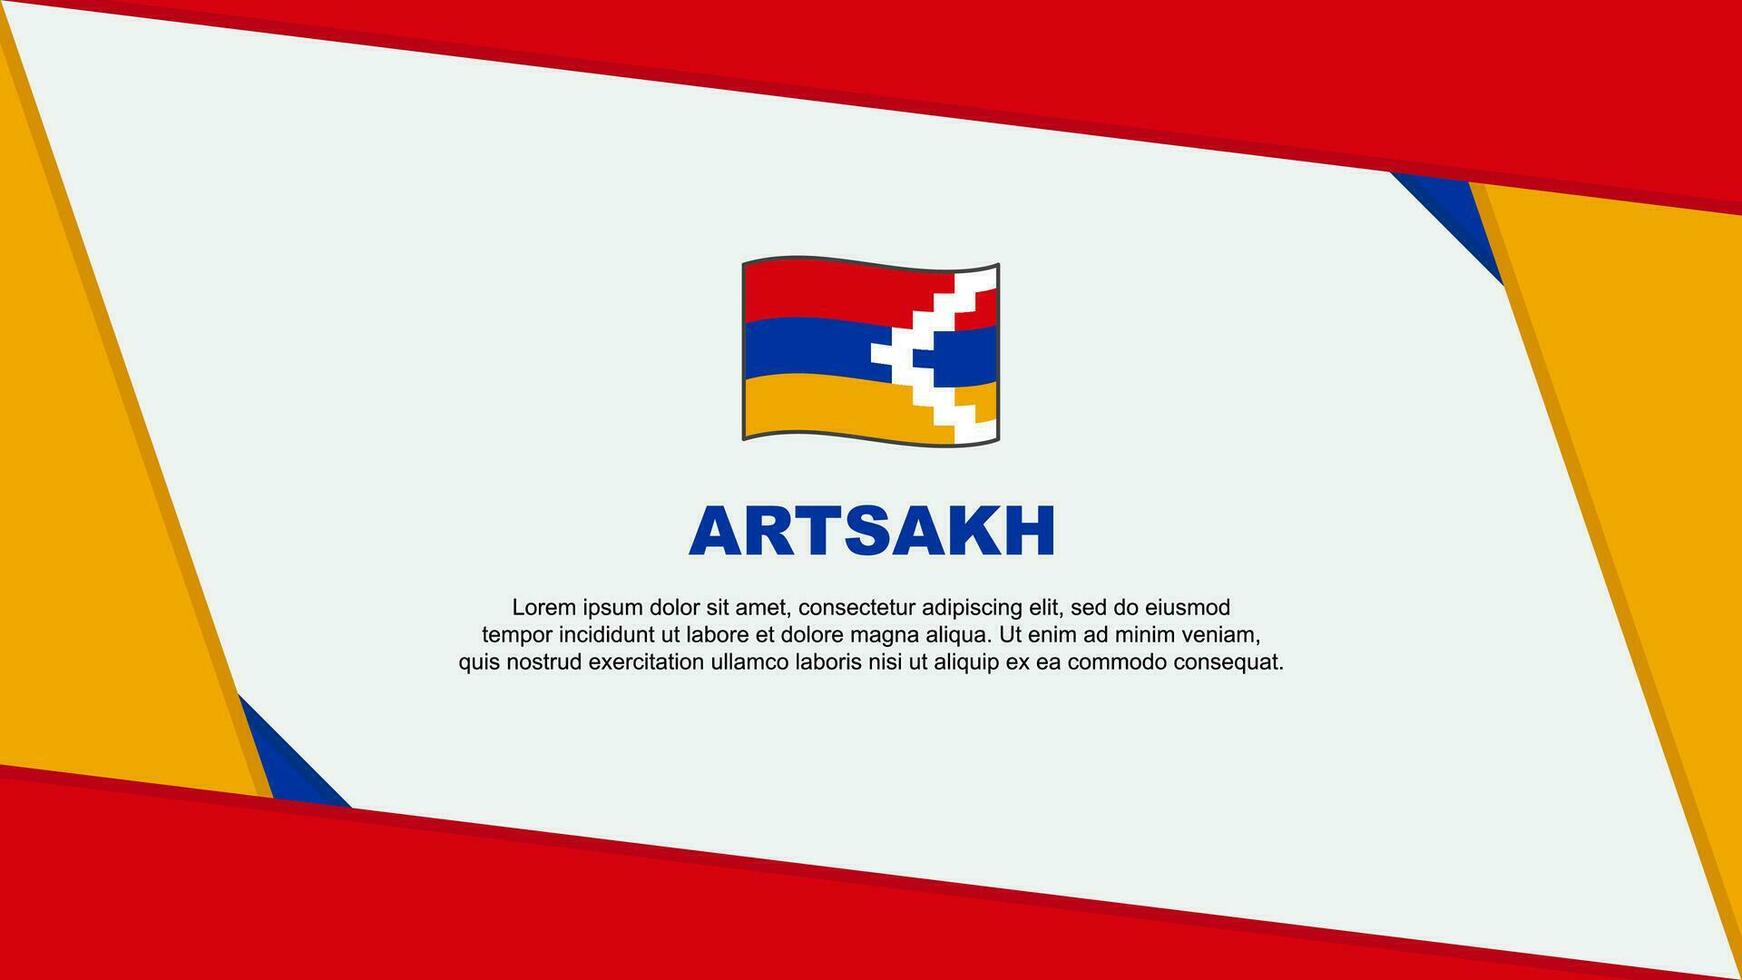 Artsakh Flag Abstract Background Design Template. Artsakh Independence Day Banner Cartoon Vector Illustration. Artsakh Independence Day